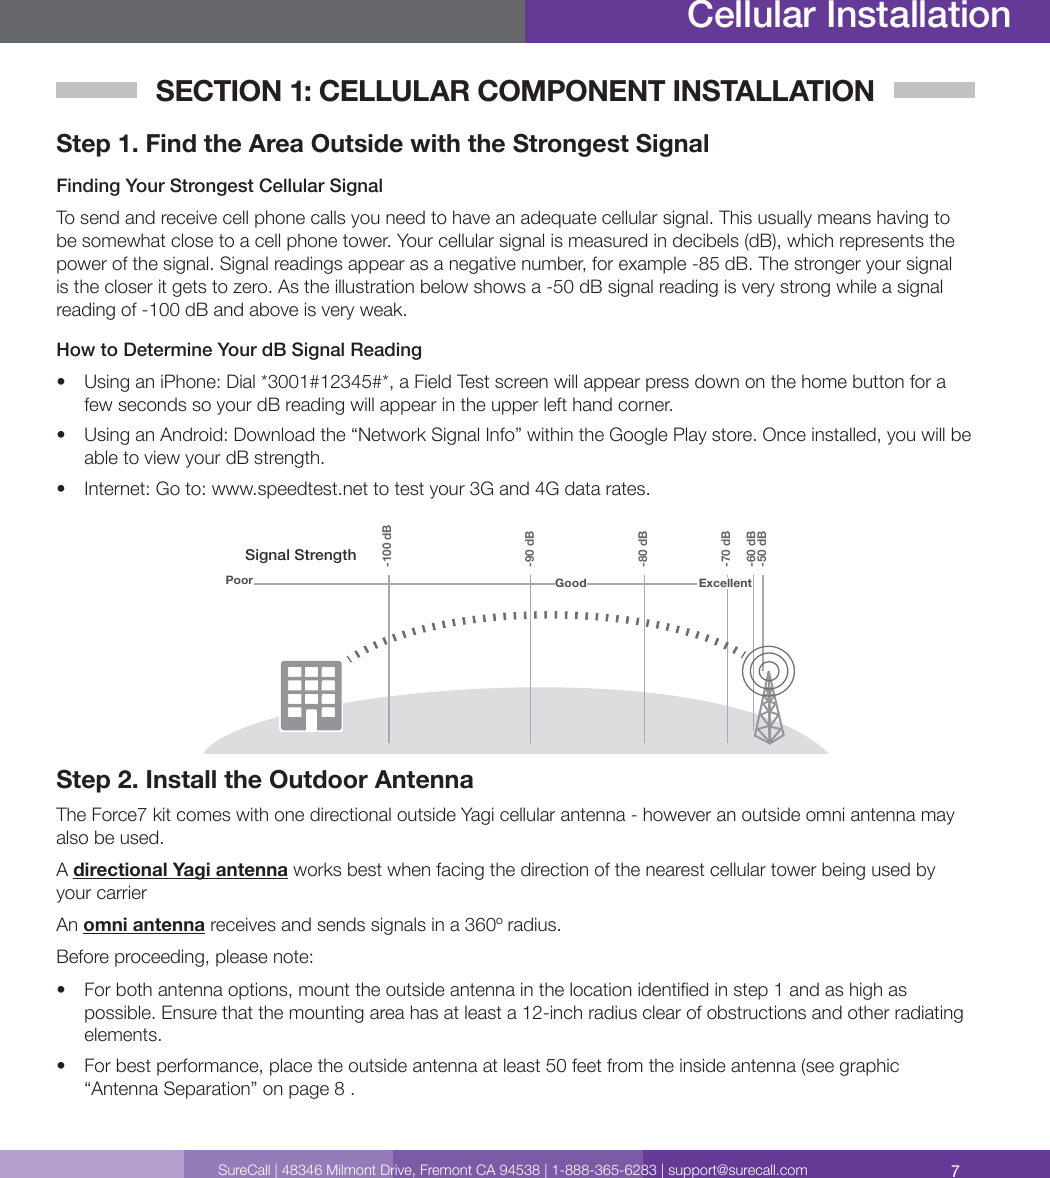 7SureCall | 48346 Milmont Drive, Fremont CA 94538 | 1-888-365-6283 | support@surecall.comSECTION 1: CELLULAR COMPONENT INSTALLATIONStep 1. Find the Area Outside with the Strongest Signal Finding Your Strongest Cellular SignalTo send and receive cell phone calls you need to have an adequate cellular signal. This usually means having to be somewhat close to a cell phone tower. Your cellular signal is measured in decibels (dB), which represents the power of the signal. Signal readings appear as a negative number, for example -85 dB. The stronger your signal is the closer it gets to zero. As the illustration below shows a -50 dB signal reading is very strong while a signal reading of -100 dB and above is very weak. How to Determine Your dB Signal Reading•  Using an iPhone: Dial *3001#12345#*, a Field Test screen will appear press down on the home button for a few seconds so your dB reading will appear in the upper left hand corner.•  Using an Android: Download the “Network Signal Info” within the Google Play store. Once installed, you will be able to view your dB strength.•  Internet: Go to: www.speedtest.net to test your 3G and 4G data rates.Signal StrengthExcellent-50 dB-60 dB-70 dB-80 dB-90 dB-100 dBGoodPoorStep 2. Install the Outdoor AntennaThe Force7 kit comes with one directional outside Yagi cellular antenna - however an outside omni antenna may also be used. A directional Yagi antenna works best when facing the direction of the nearest cellular tower being used by your carrierAn omni antenna receives and sends signals in a 360º radius. Before proceeding, please note:•  For both antenna options, mount the outside antenna in the location identied in step 1 and as high as possible. Ensure that the mounting area has at least a 12-inch radius clear of obstructions and other radiating elements. •  For best performance, place the outside antenna at least 50 feet from the inside antenna (see graphic “Antenna Separation” on page 8 . Cellular Installation